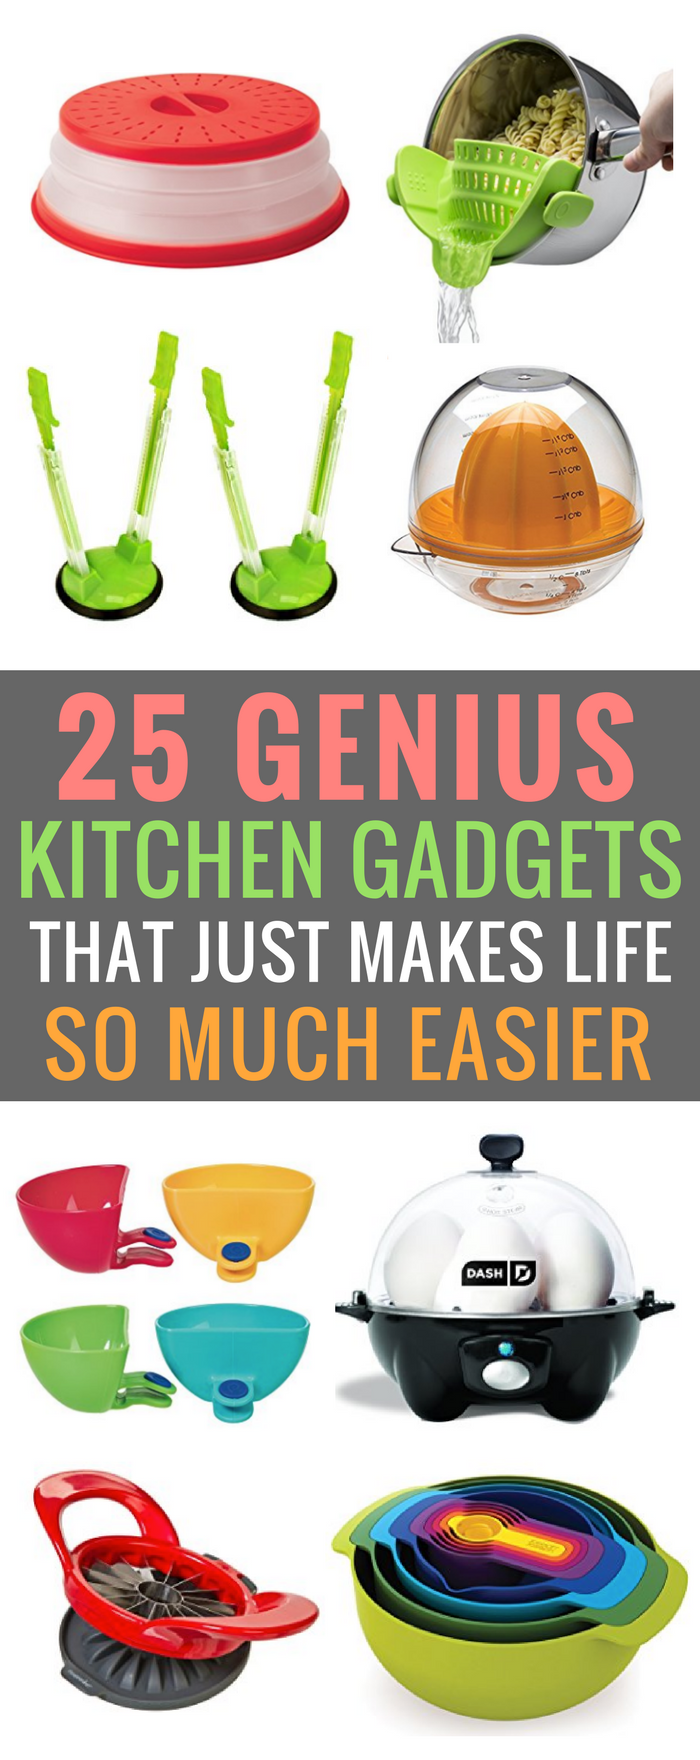 25 Genius Kitchen Gadgets and Gizmos That Are Pretty Awesome #kitchen #gadgets